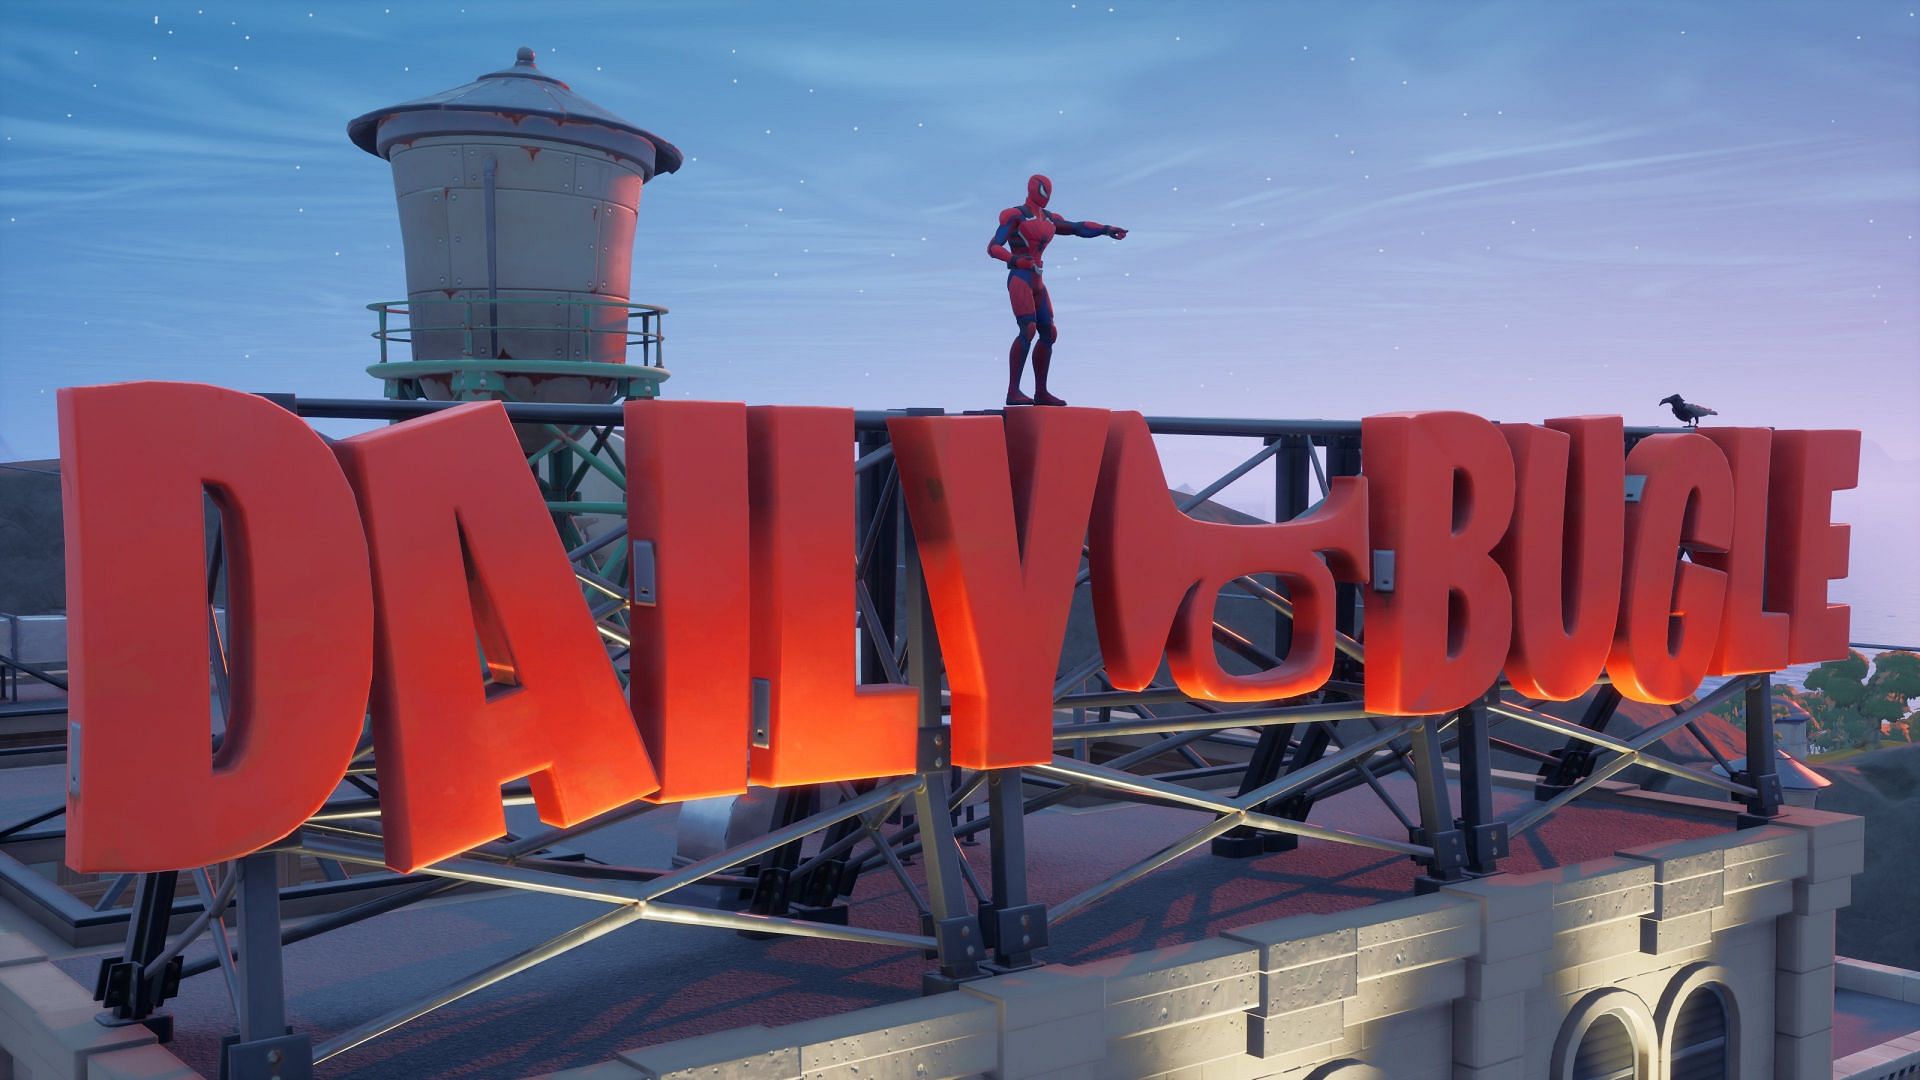 The Daily Bugle may be removed soon from Fortnite (Image via Twitter/PiLotTRr)